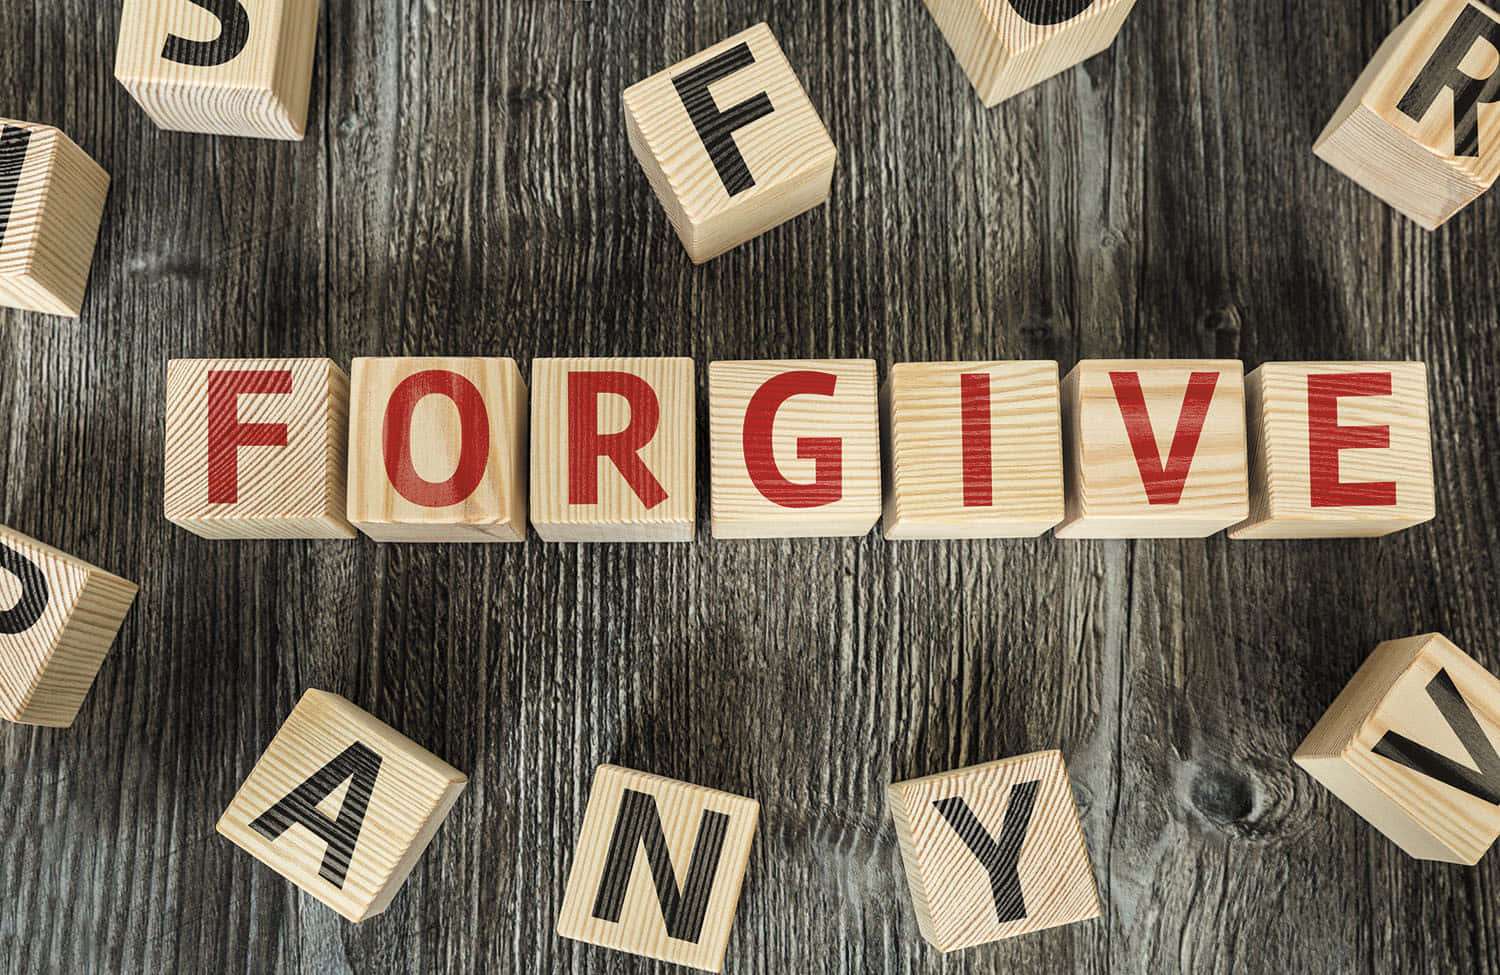 "It's never too late to forgive."